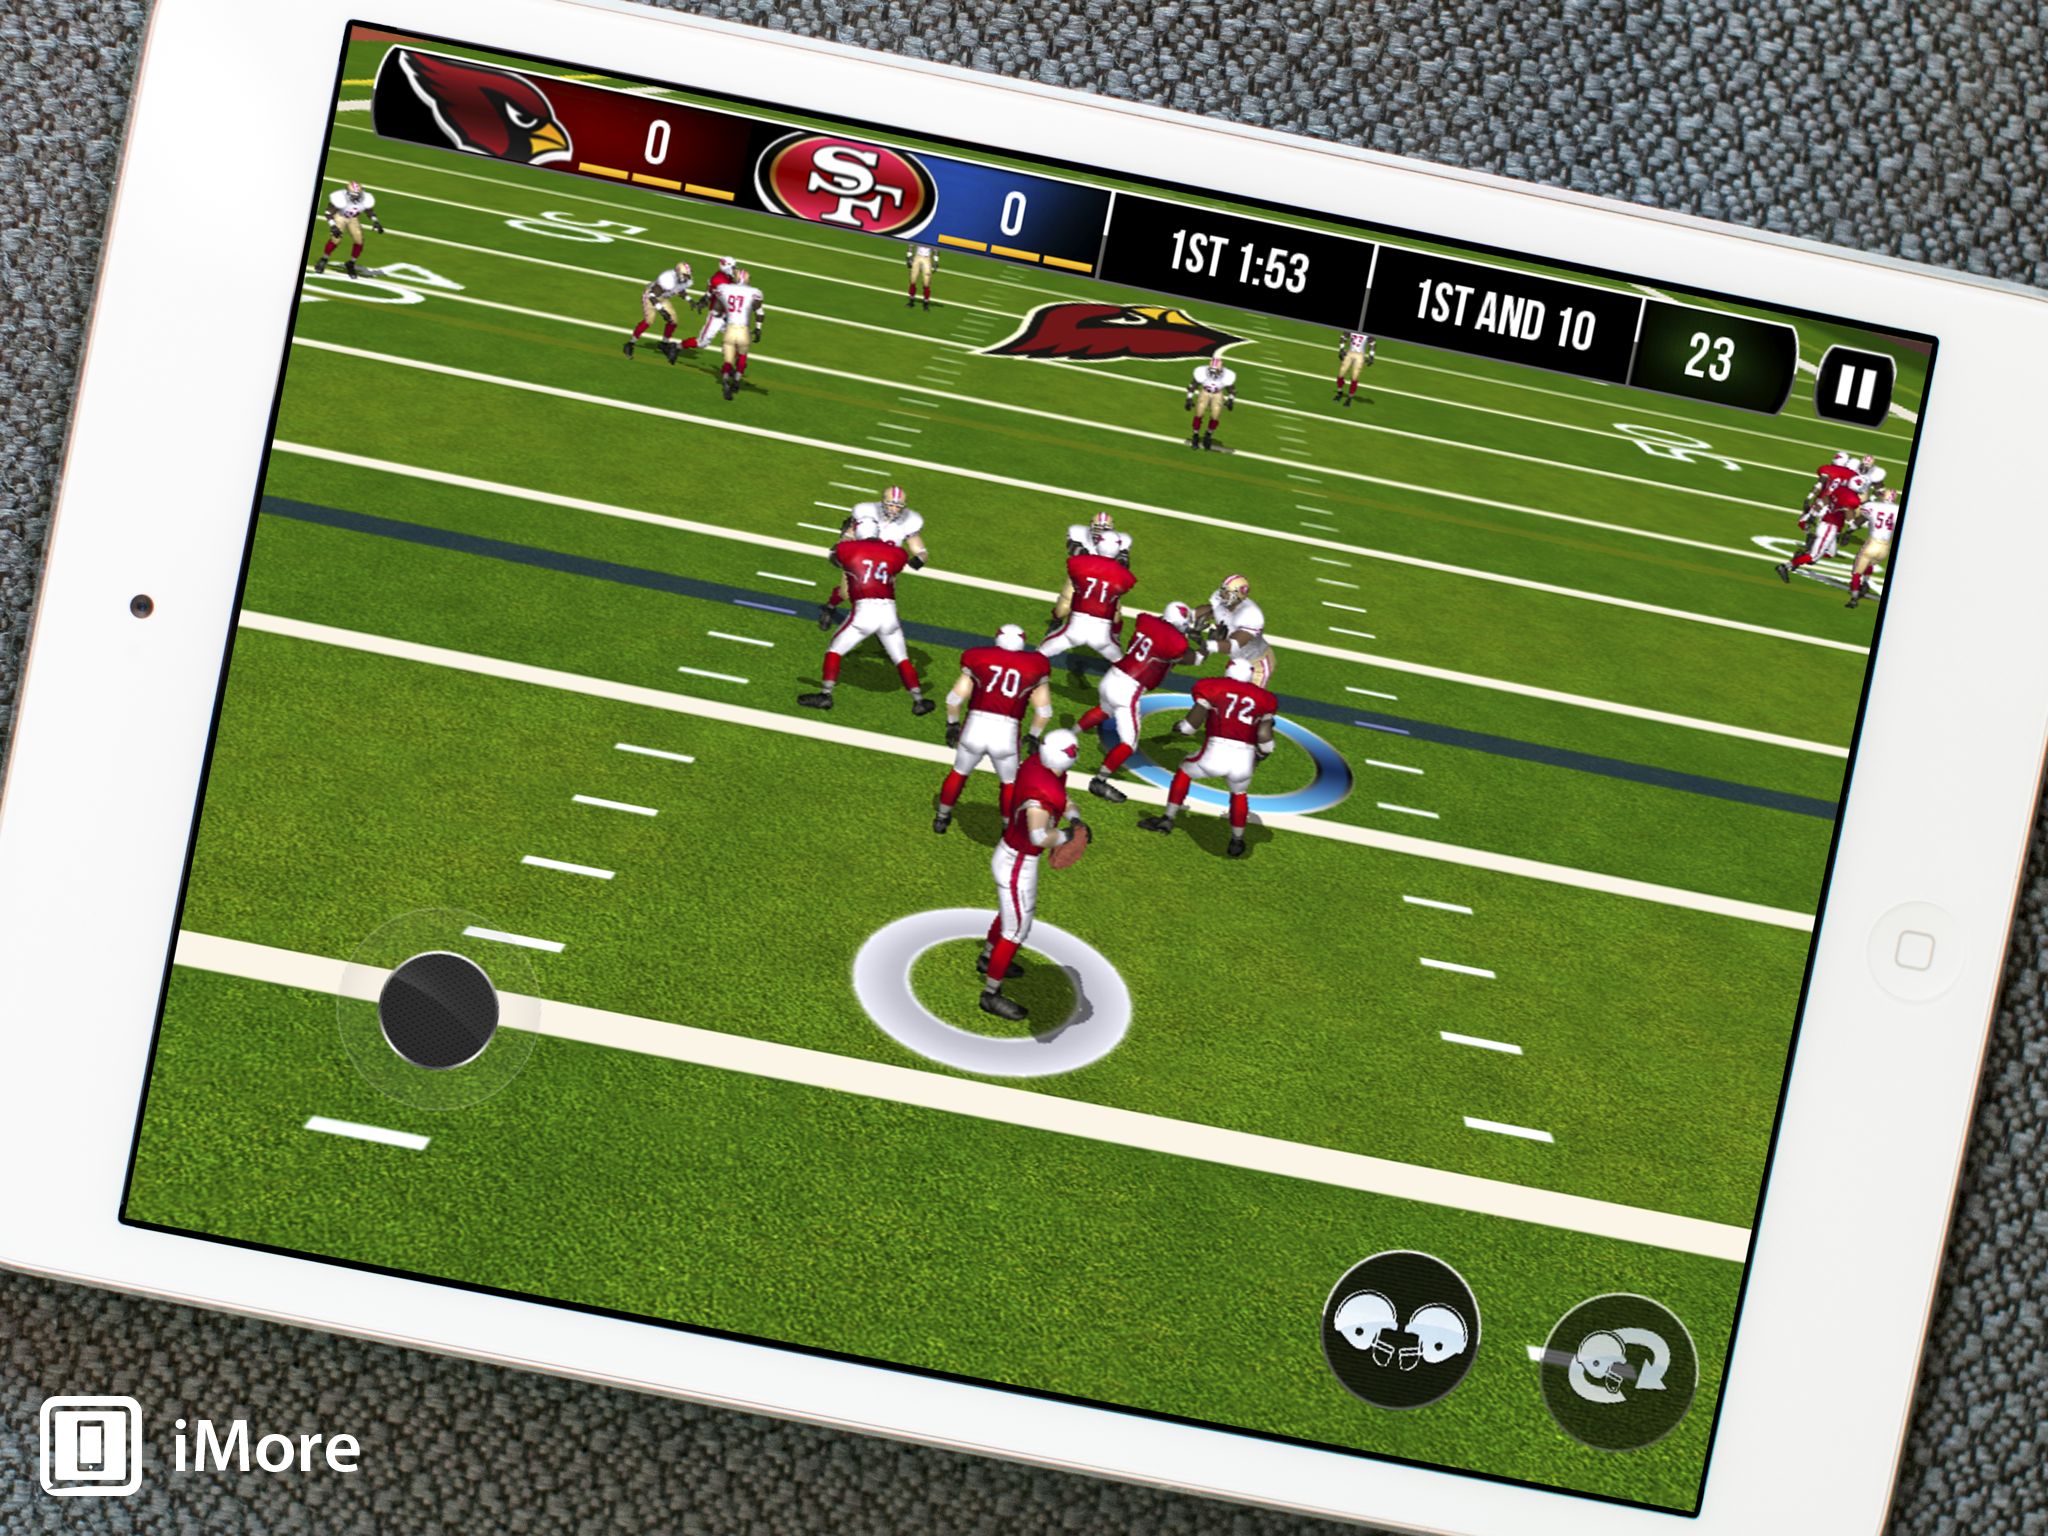 NFL Pro 2014 now available